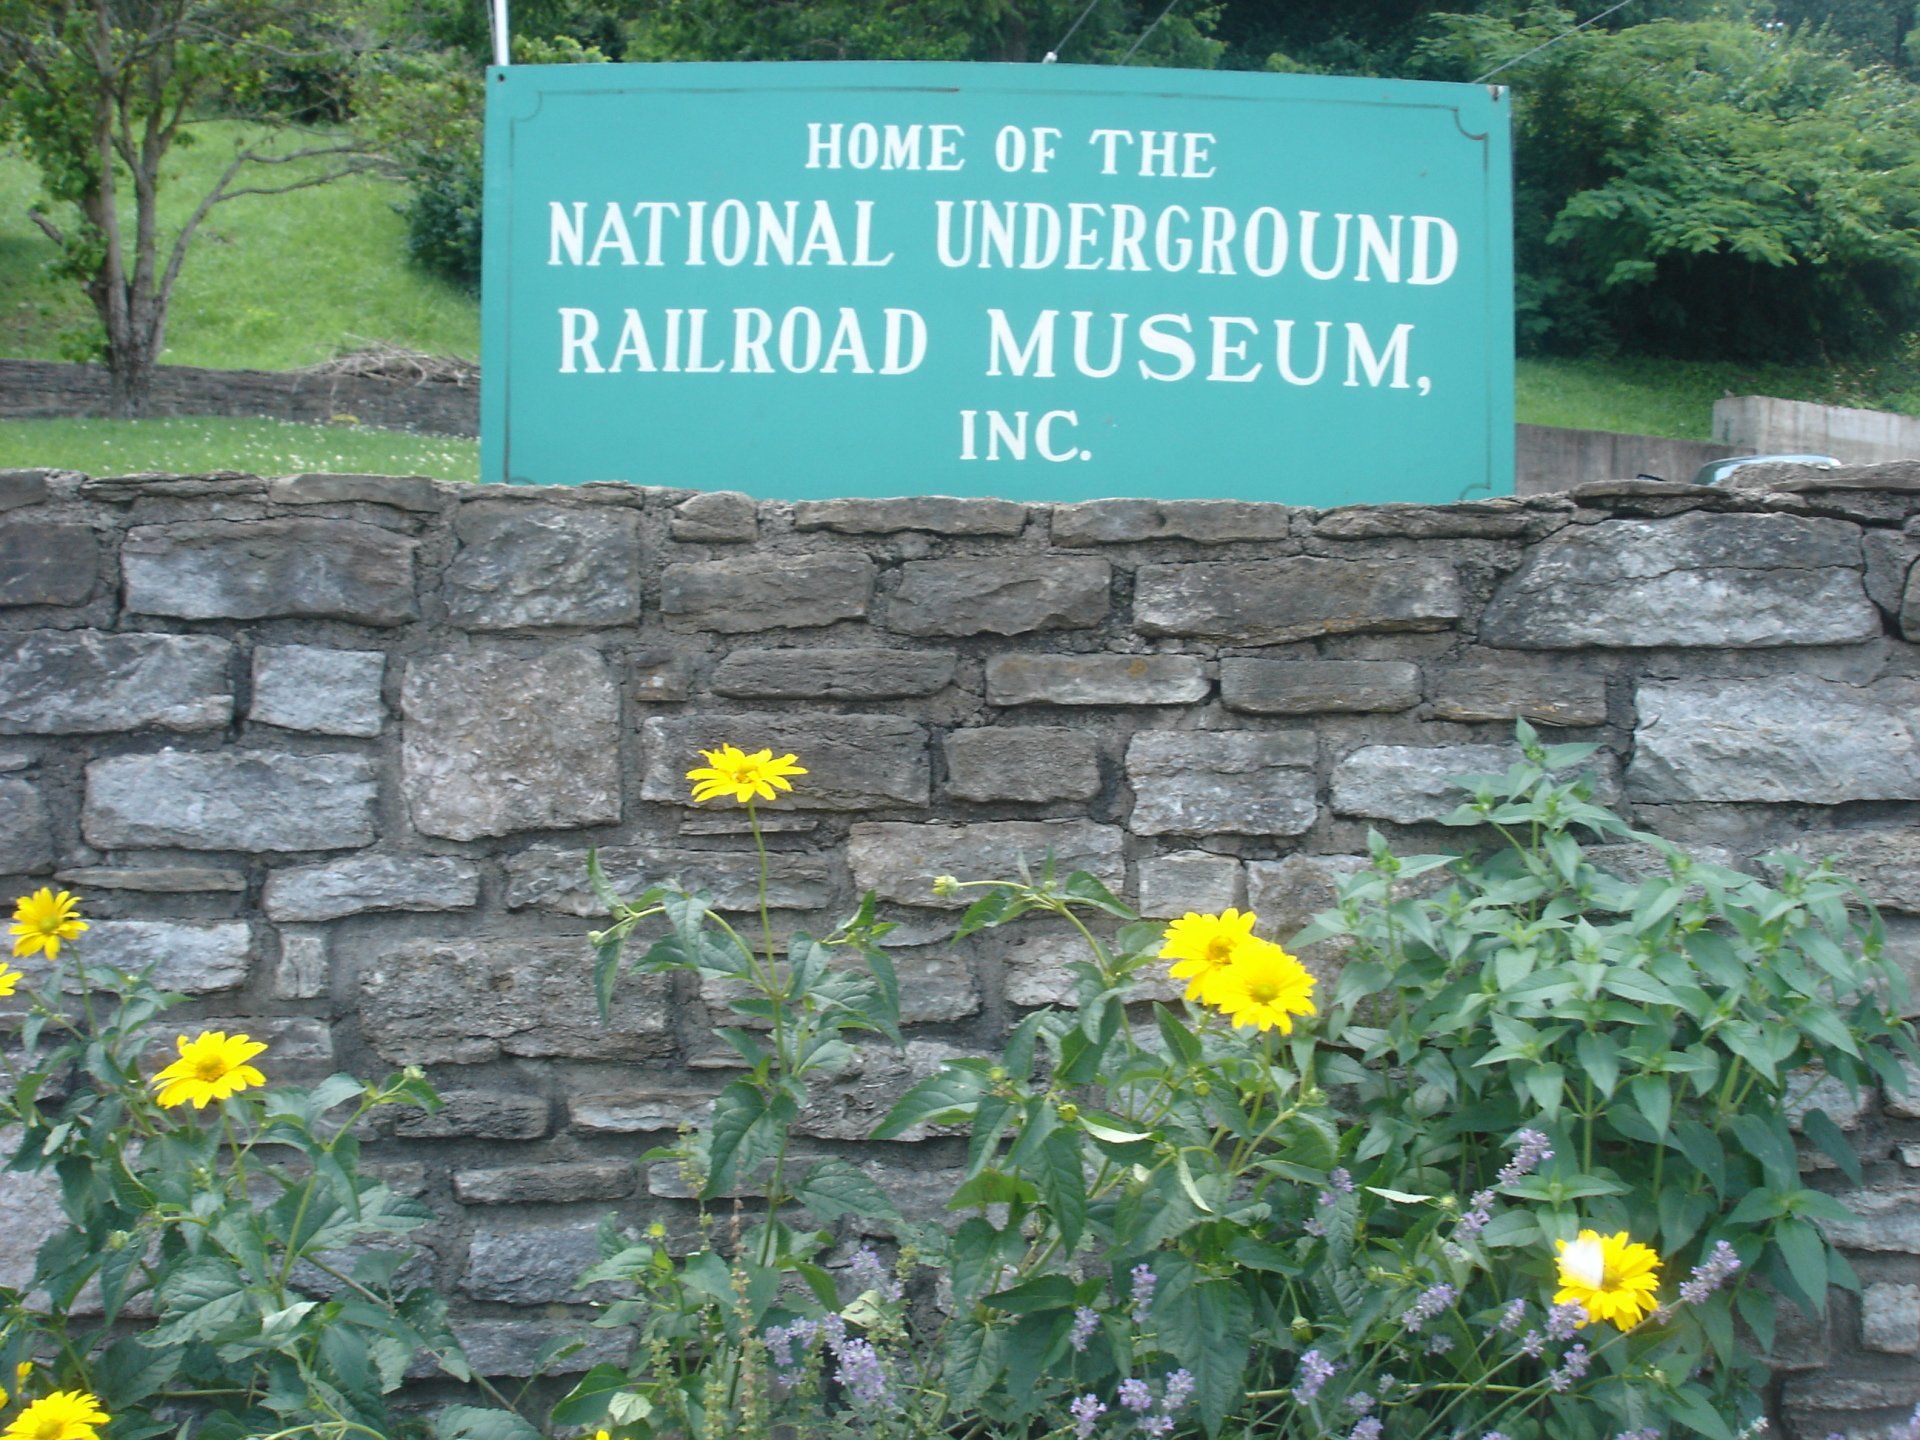 Sign outside of Underground Railroad Museum in Maysville